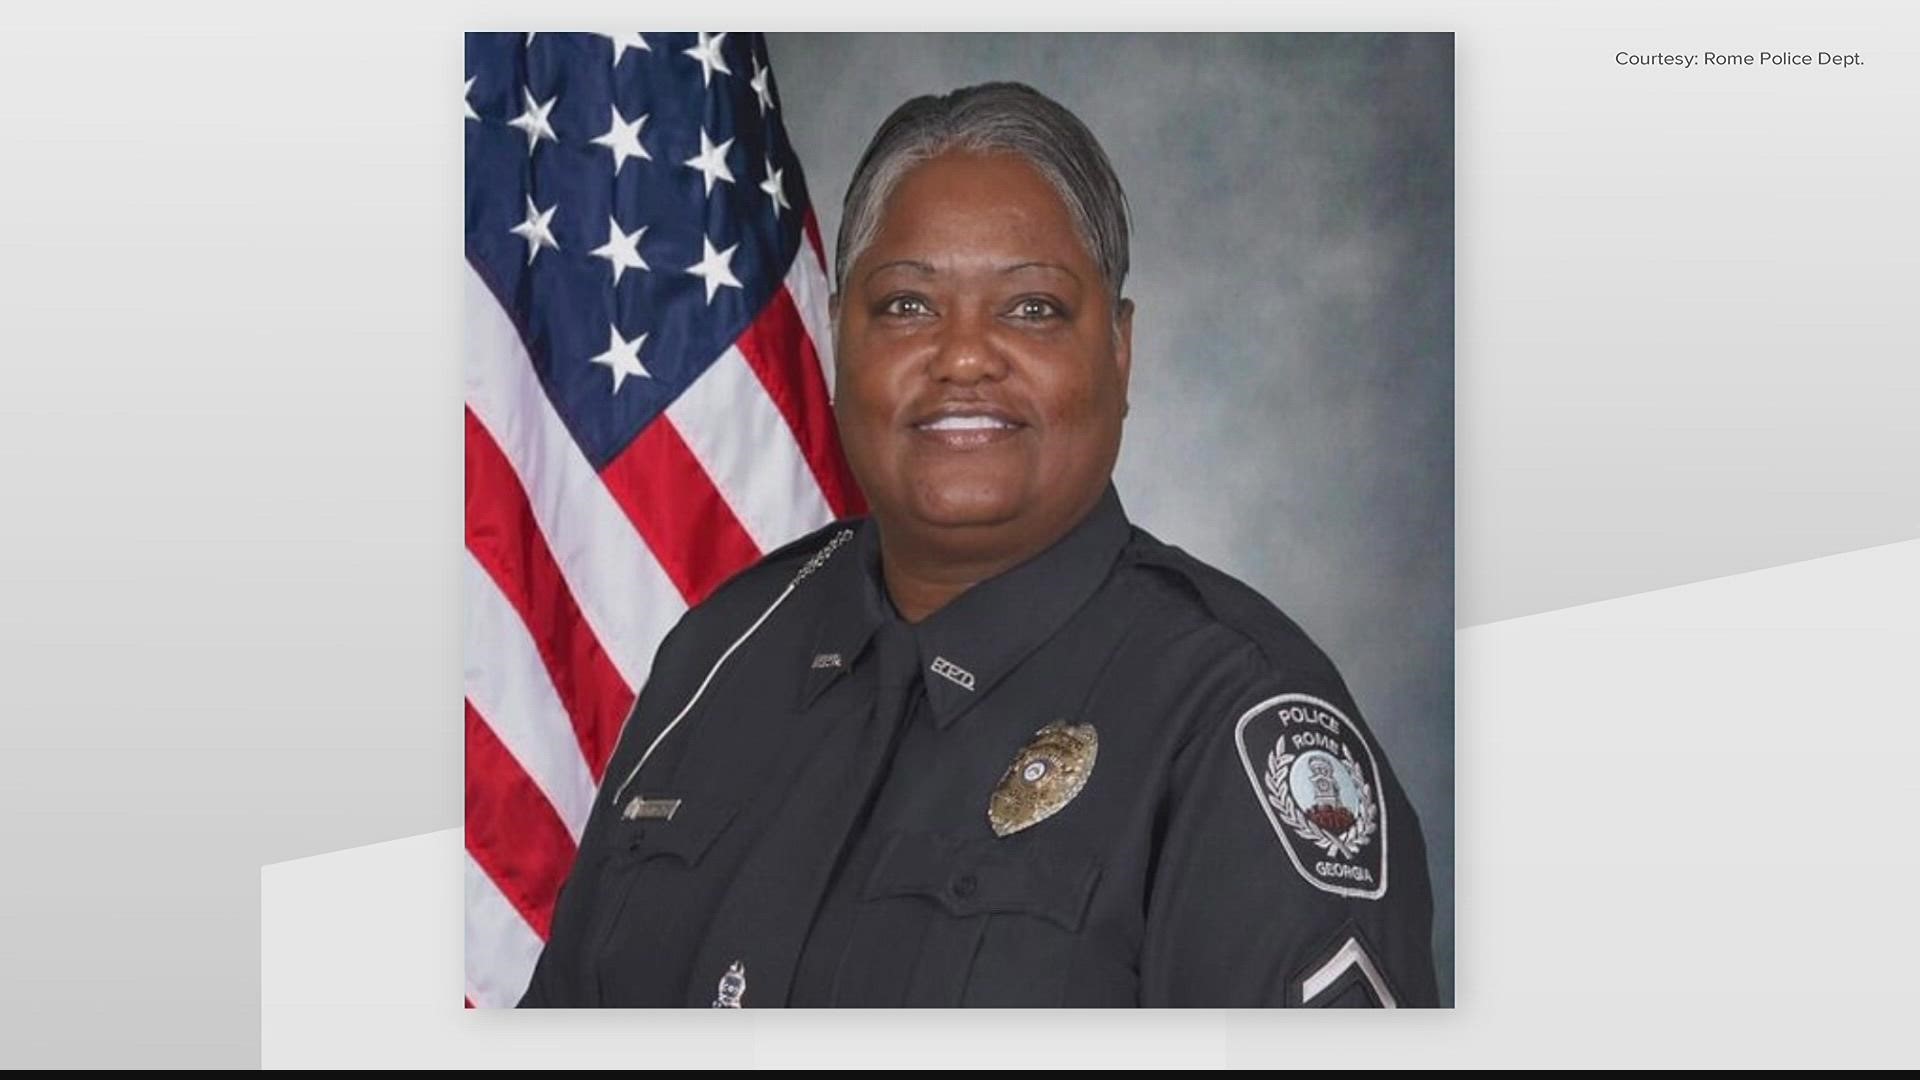 She served 34 years with the department before retiring July 2018.